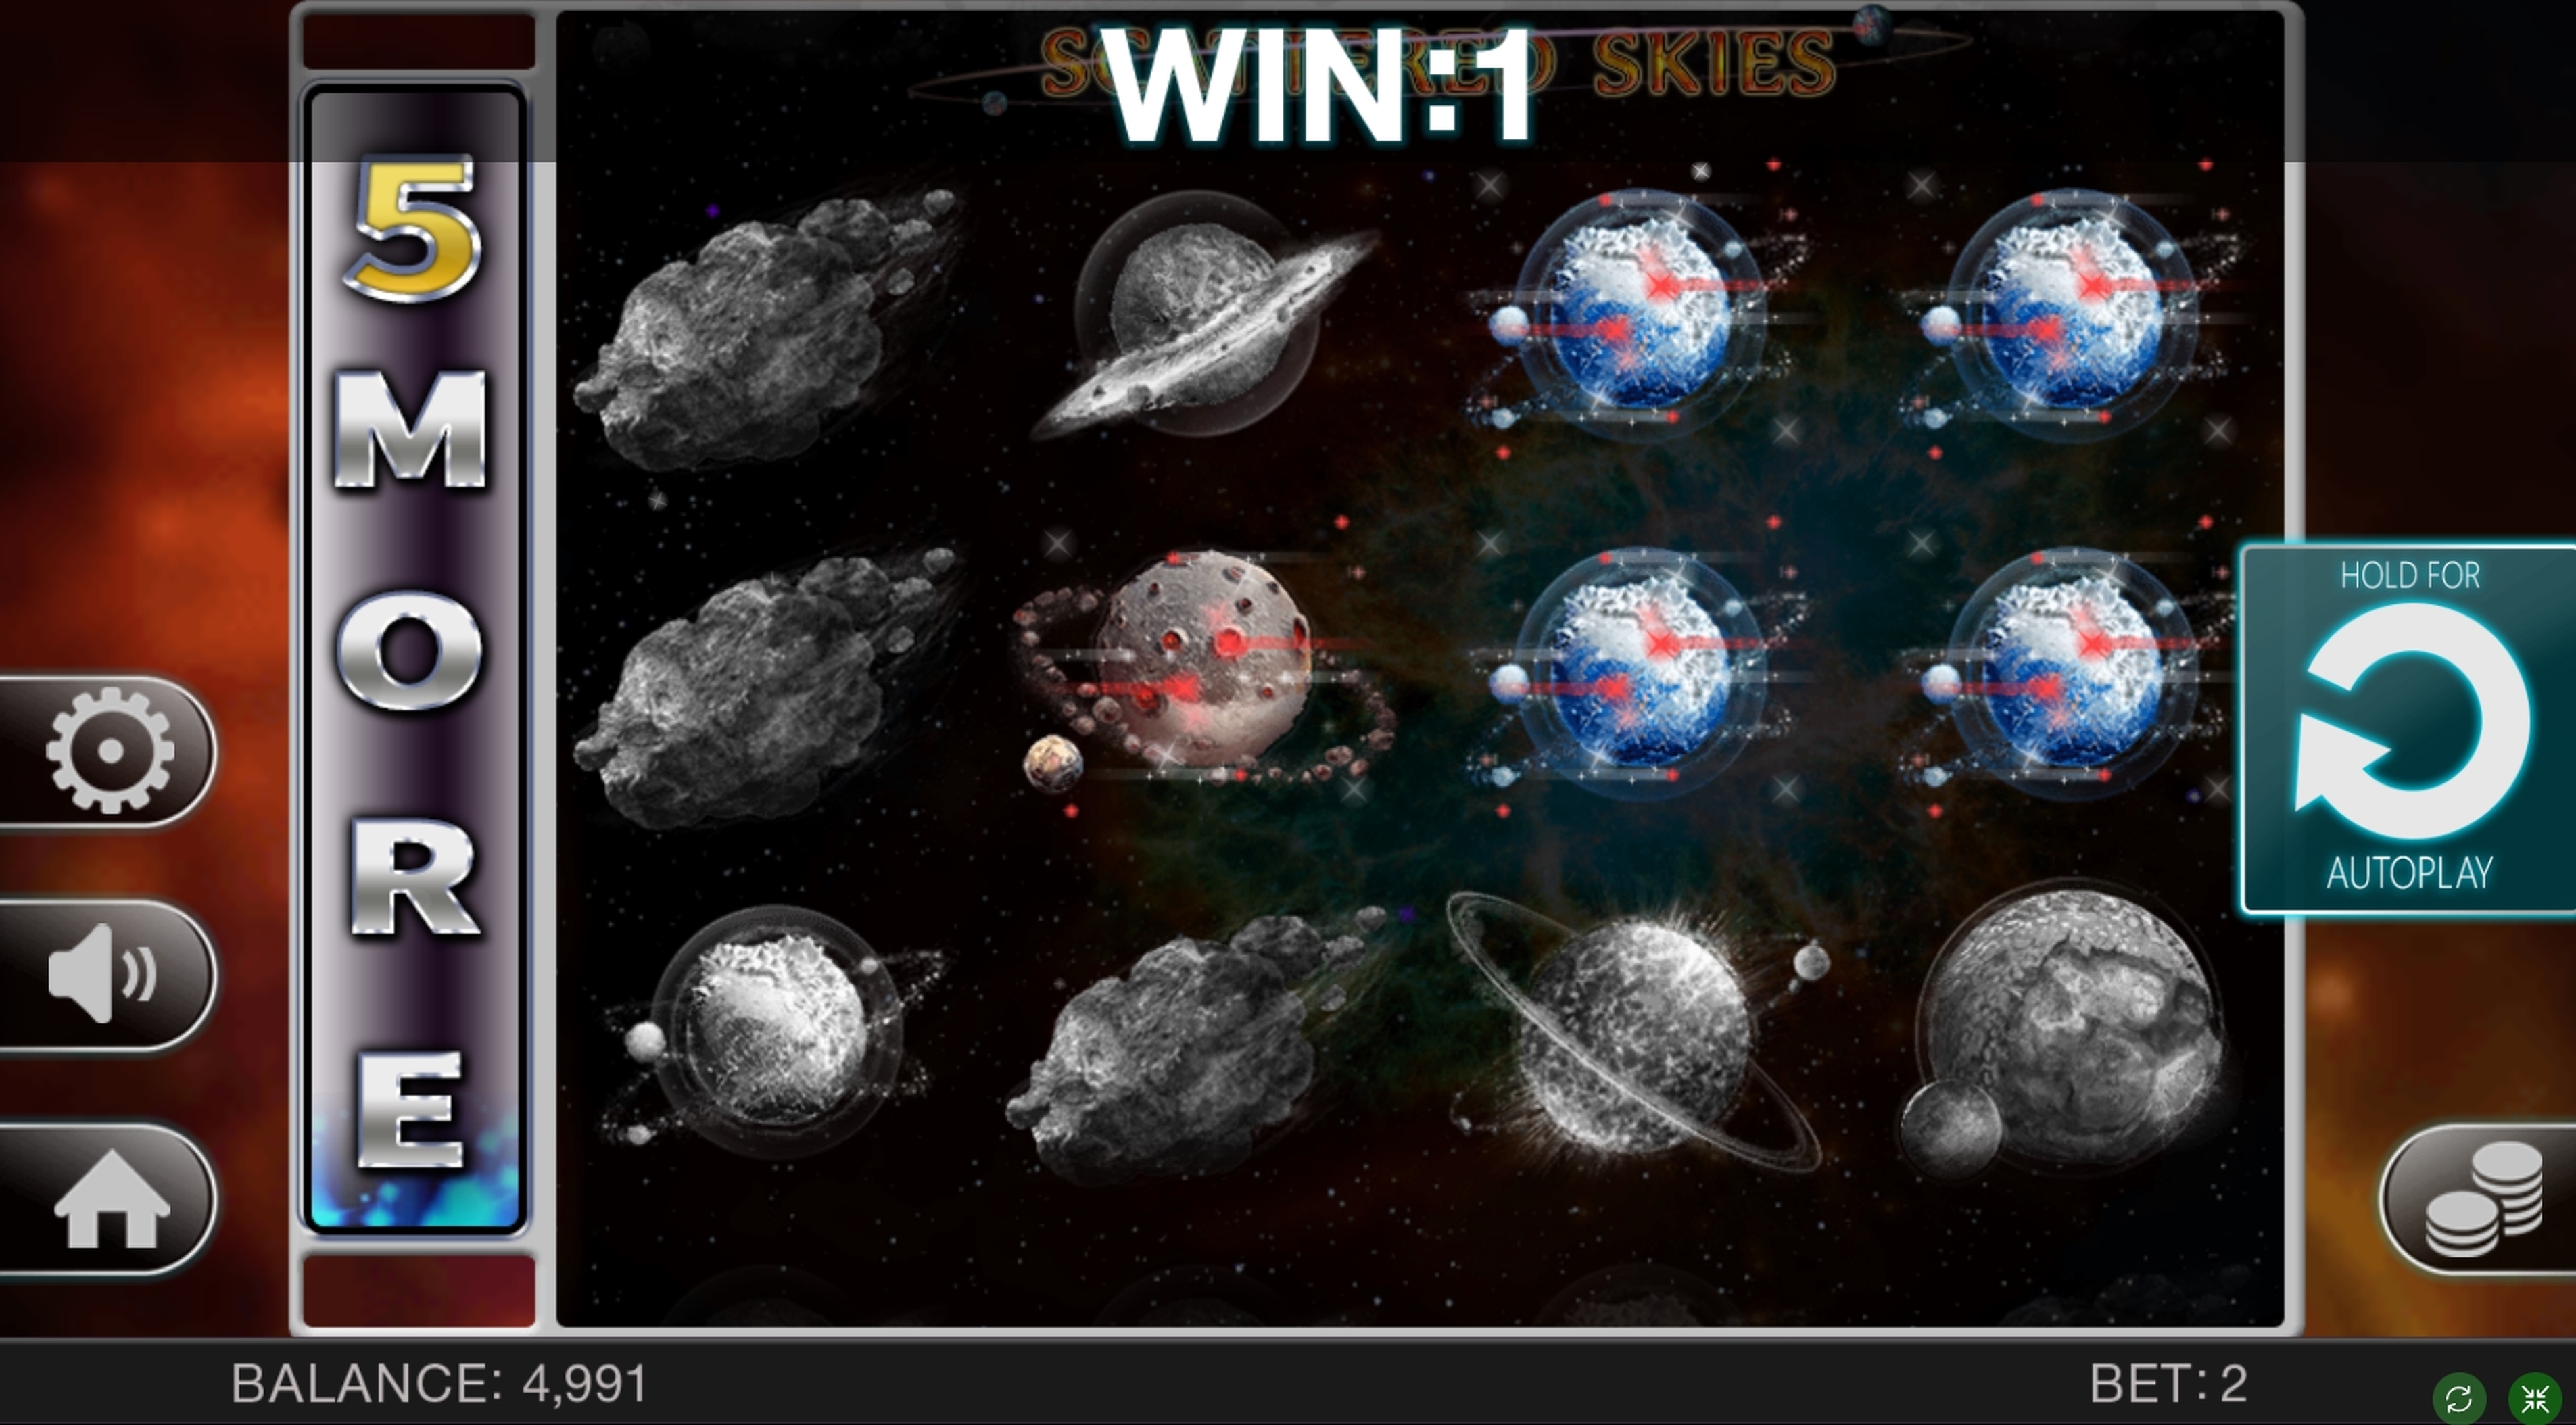 Win Money in Scattered skies Free Slot Game by Spinomenal